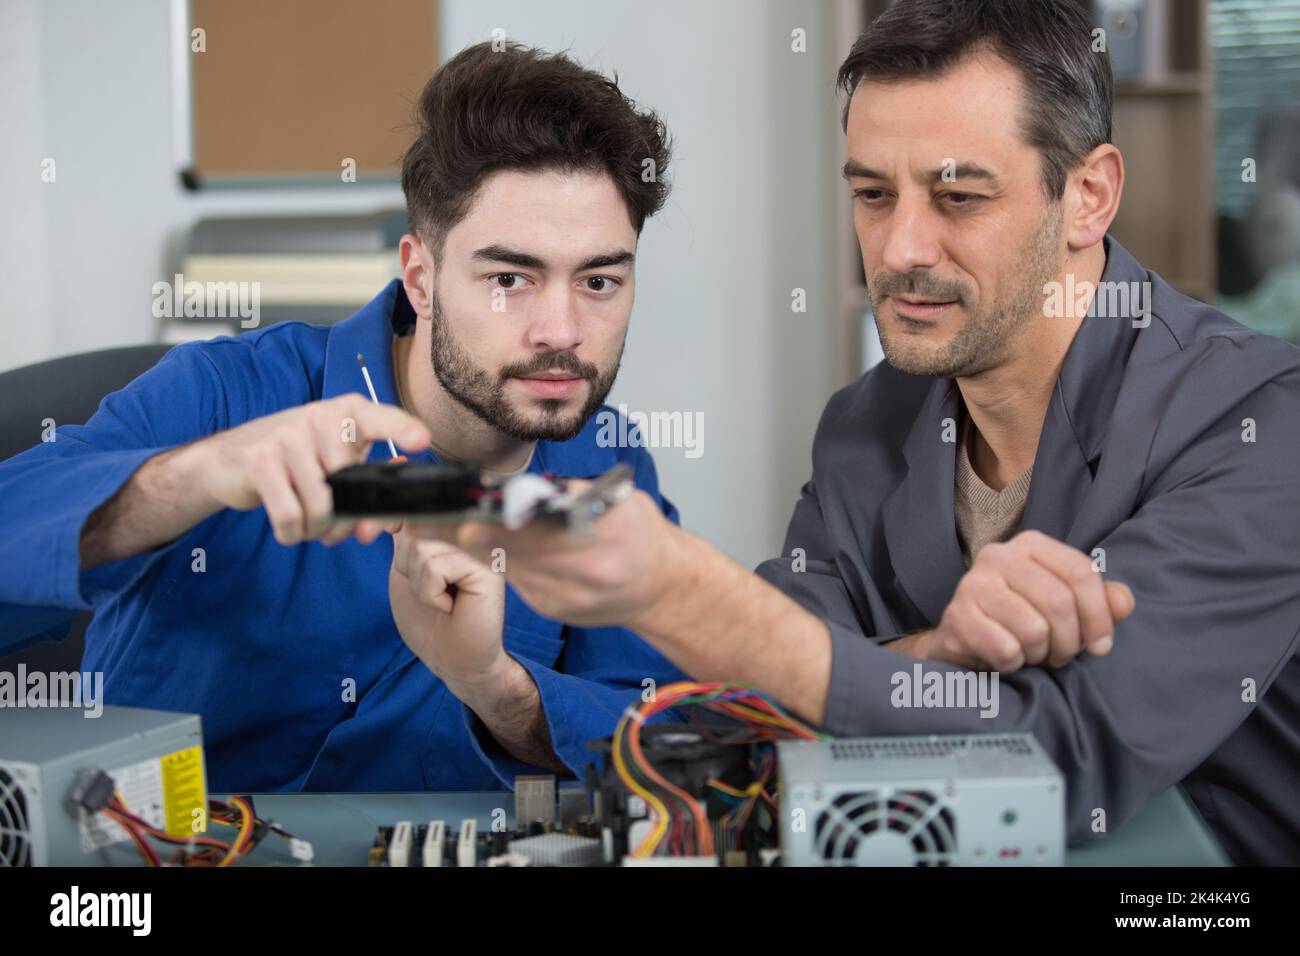 computer technician learning with his supervisor Stock Photo